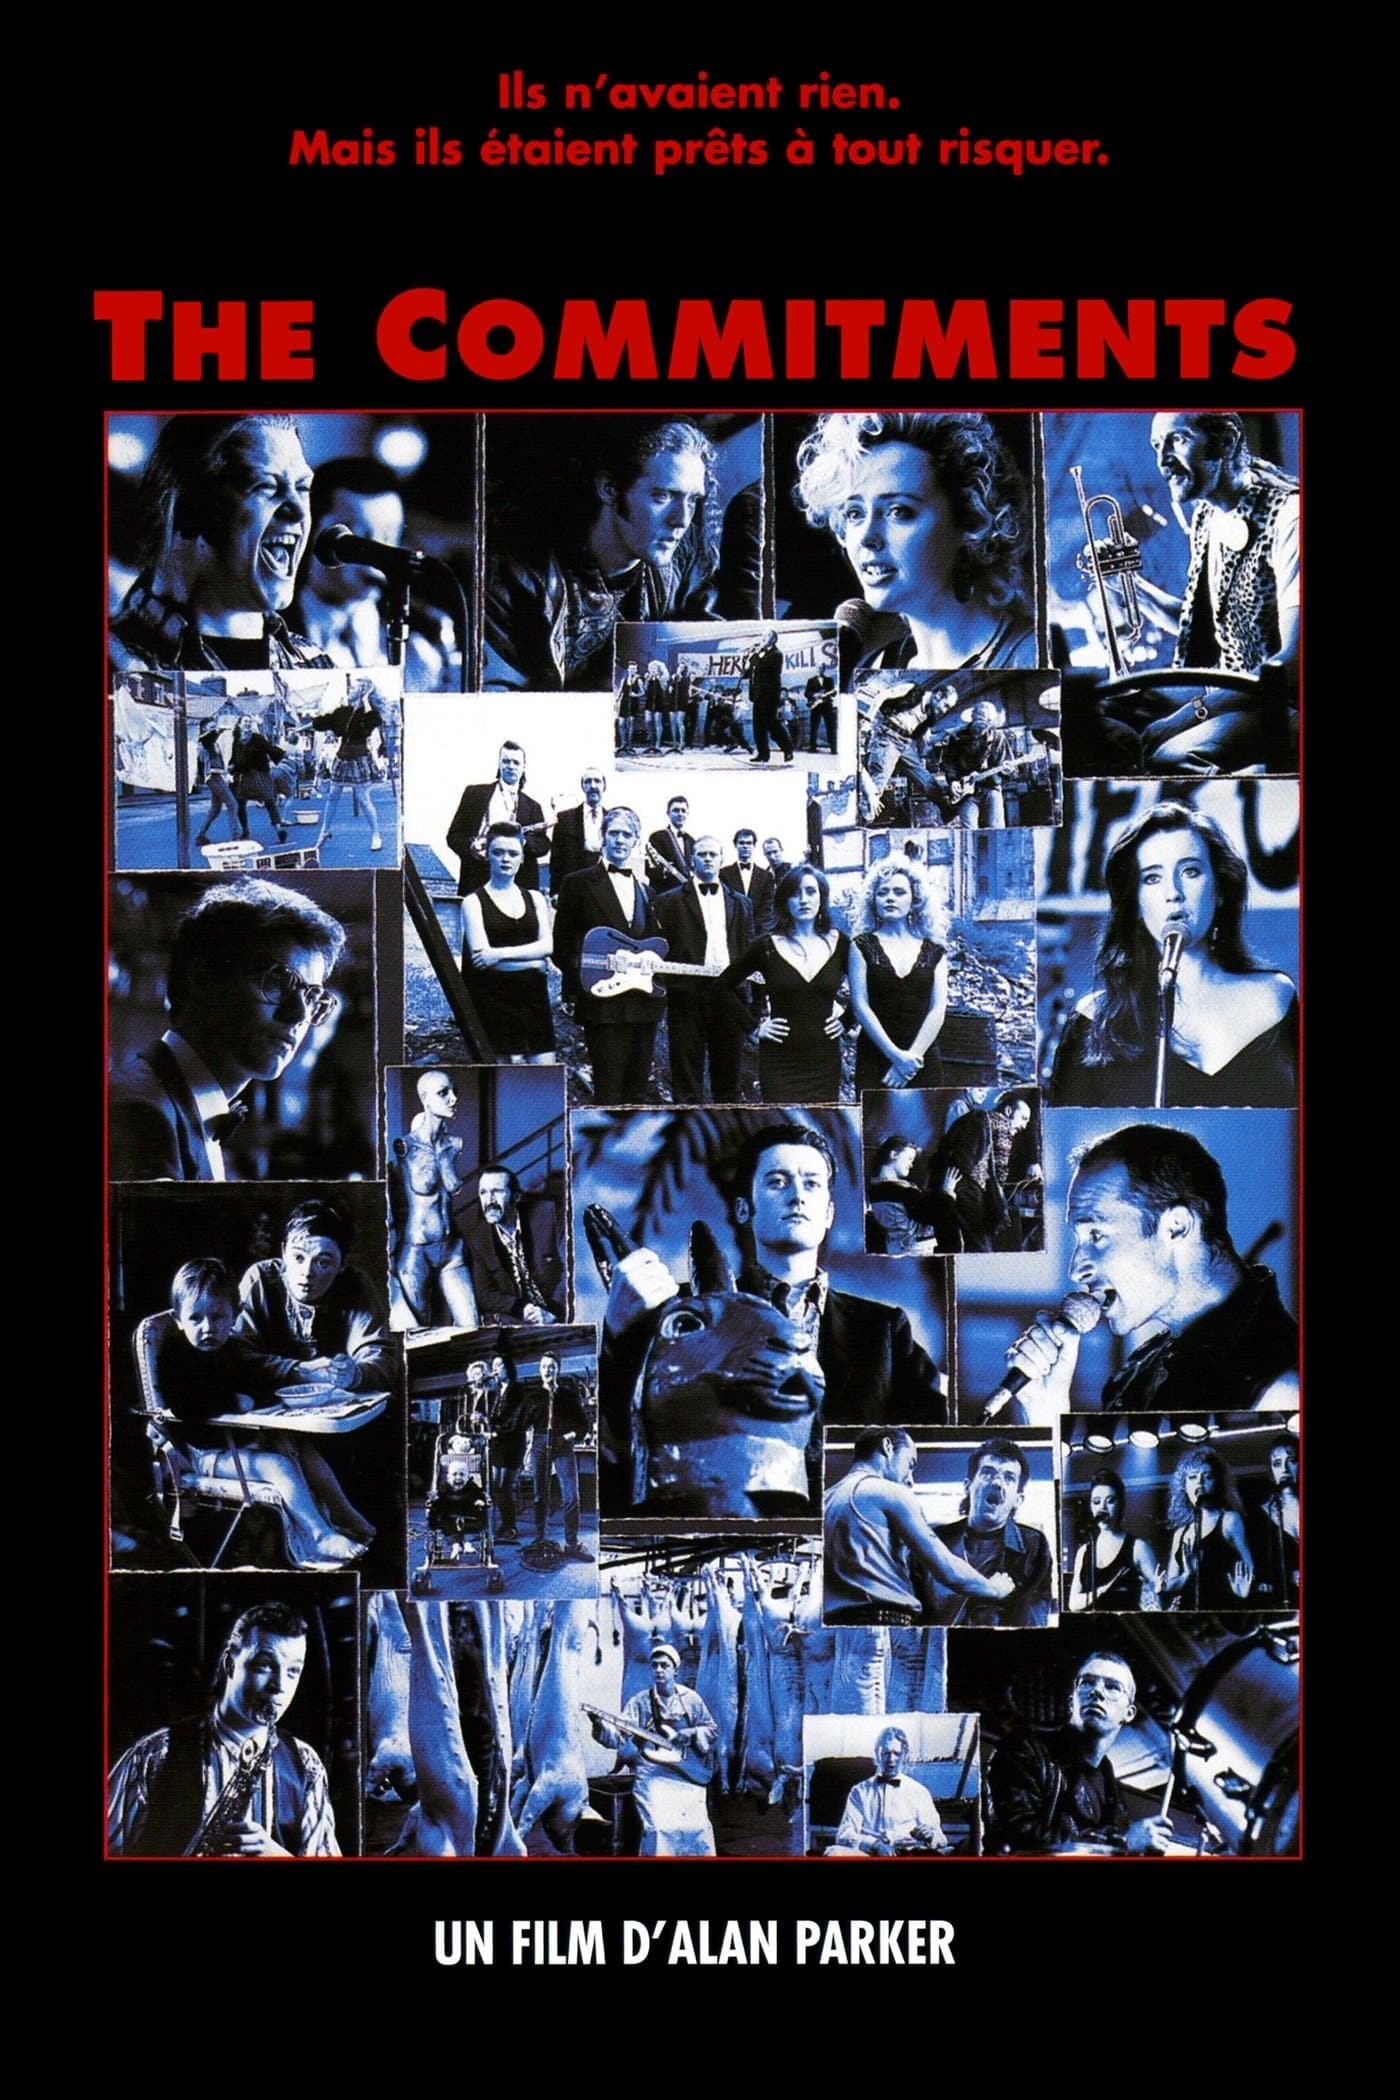 Les Commitments - Film complet en streaming VF HD